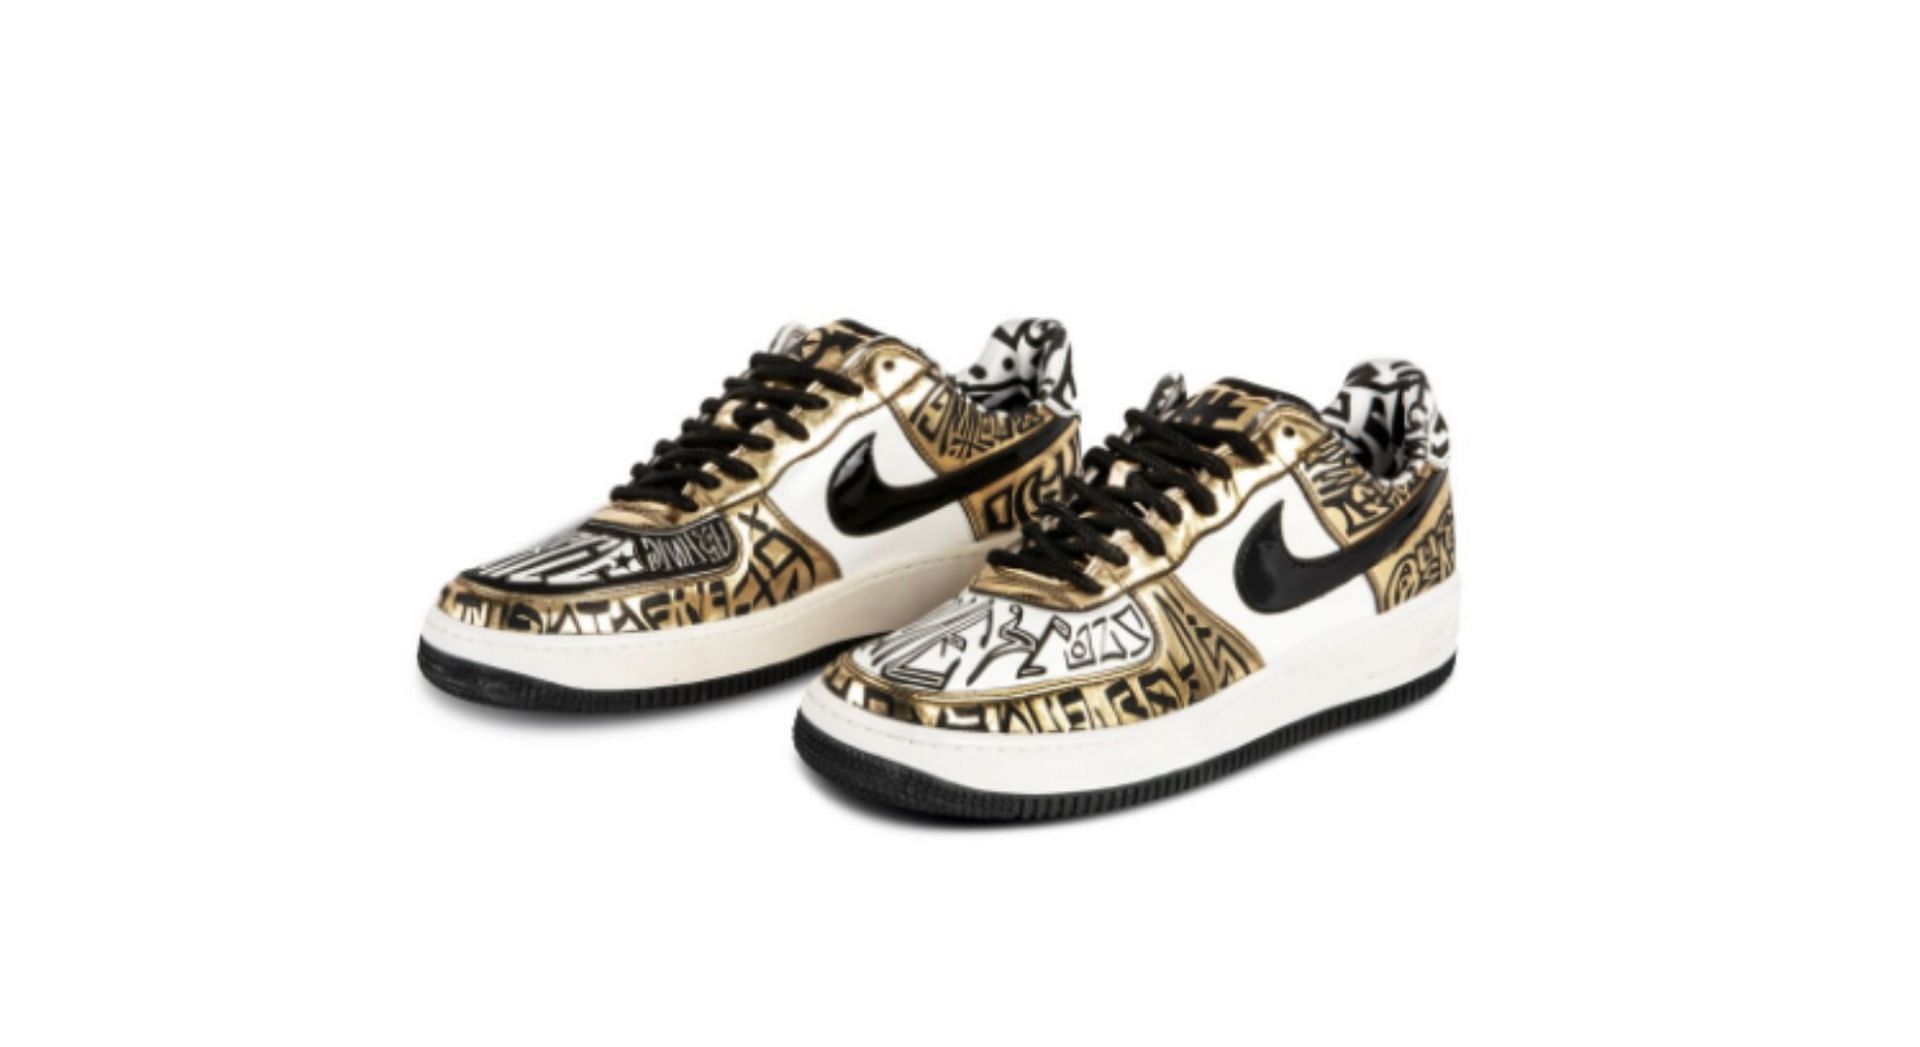 Nike Air Force 1 &#039;Entourage x Undefeated x Fukijama Gold (Image via Sotheby&#039;s)